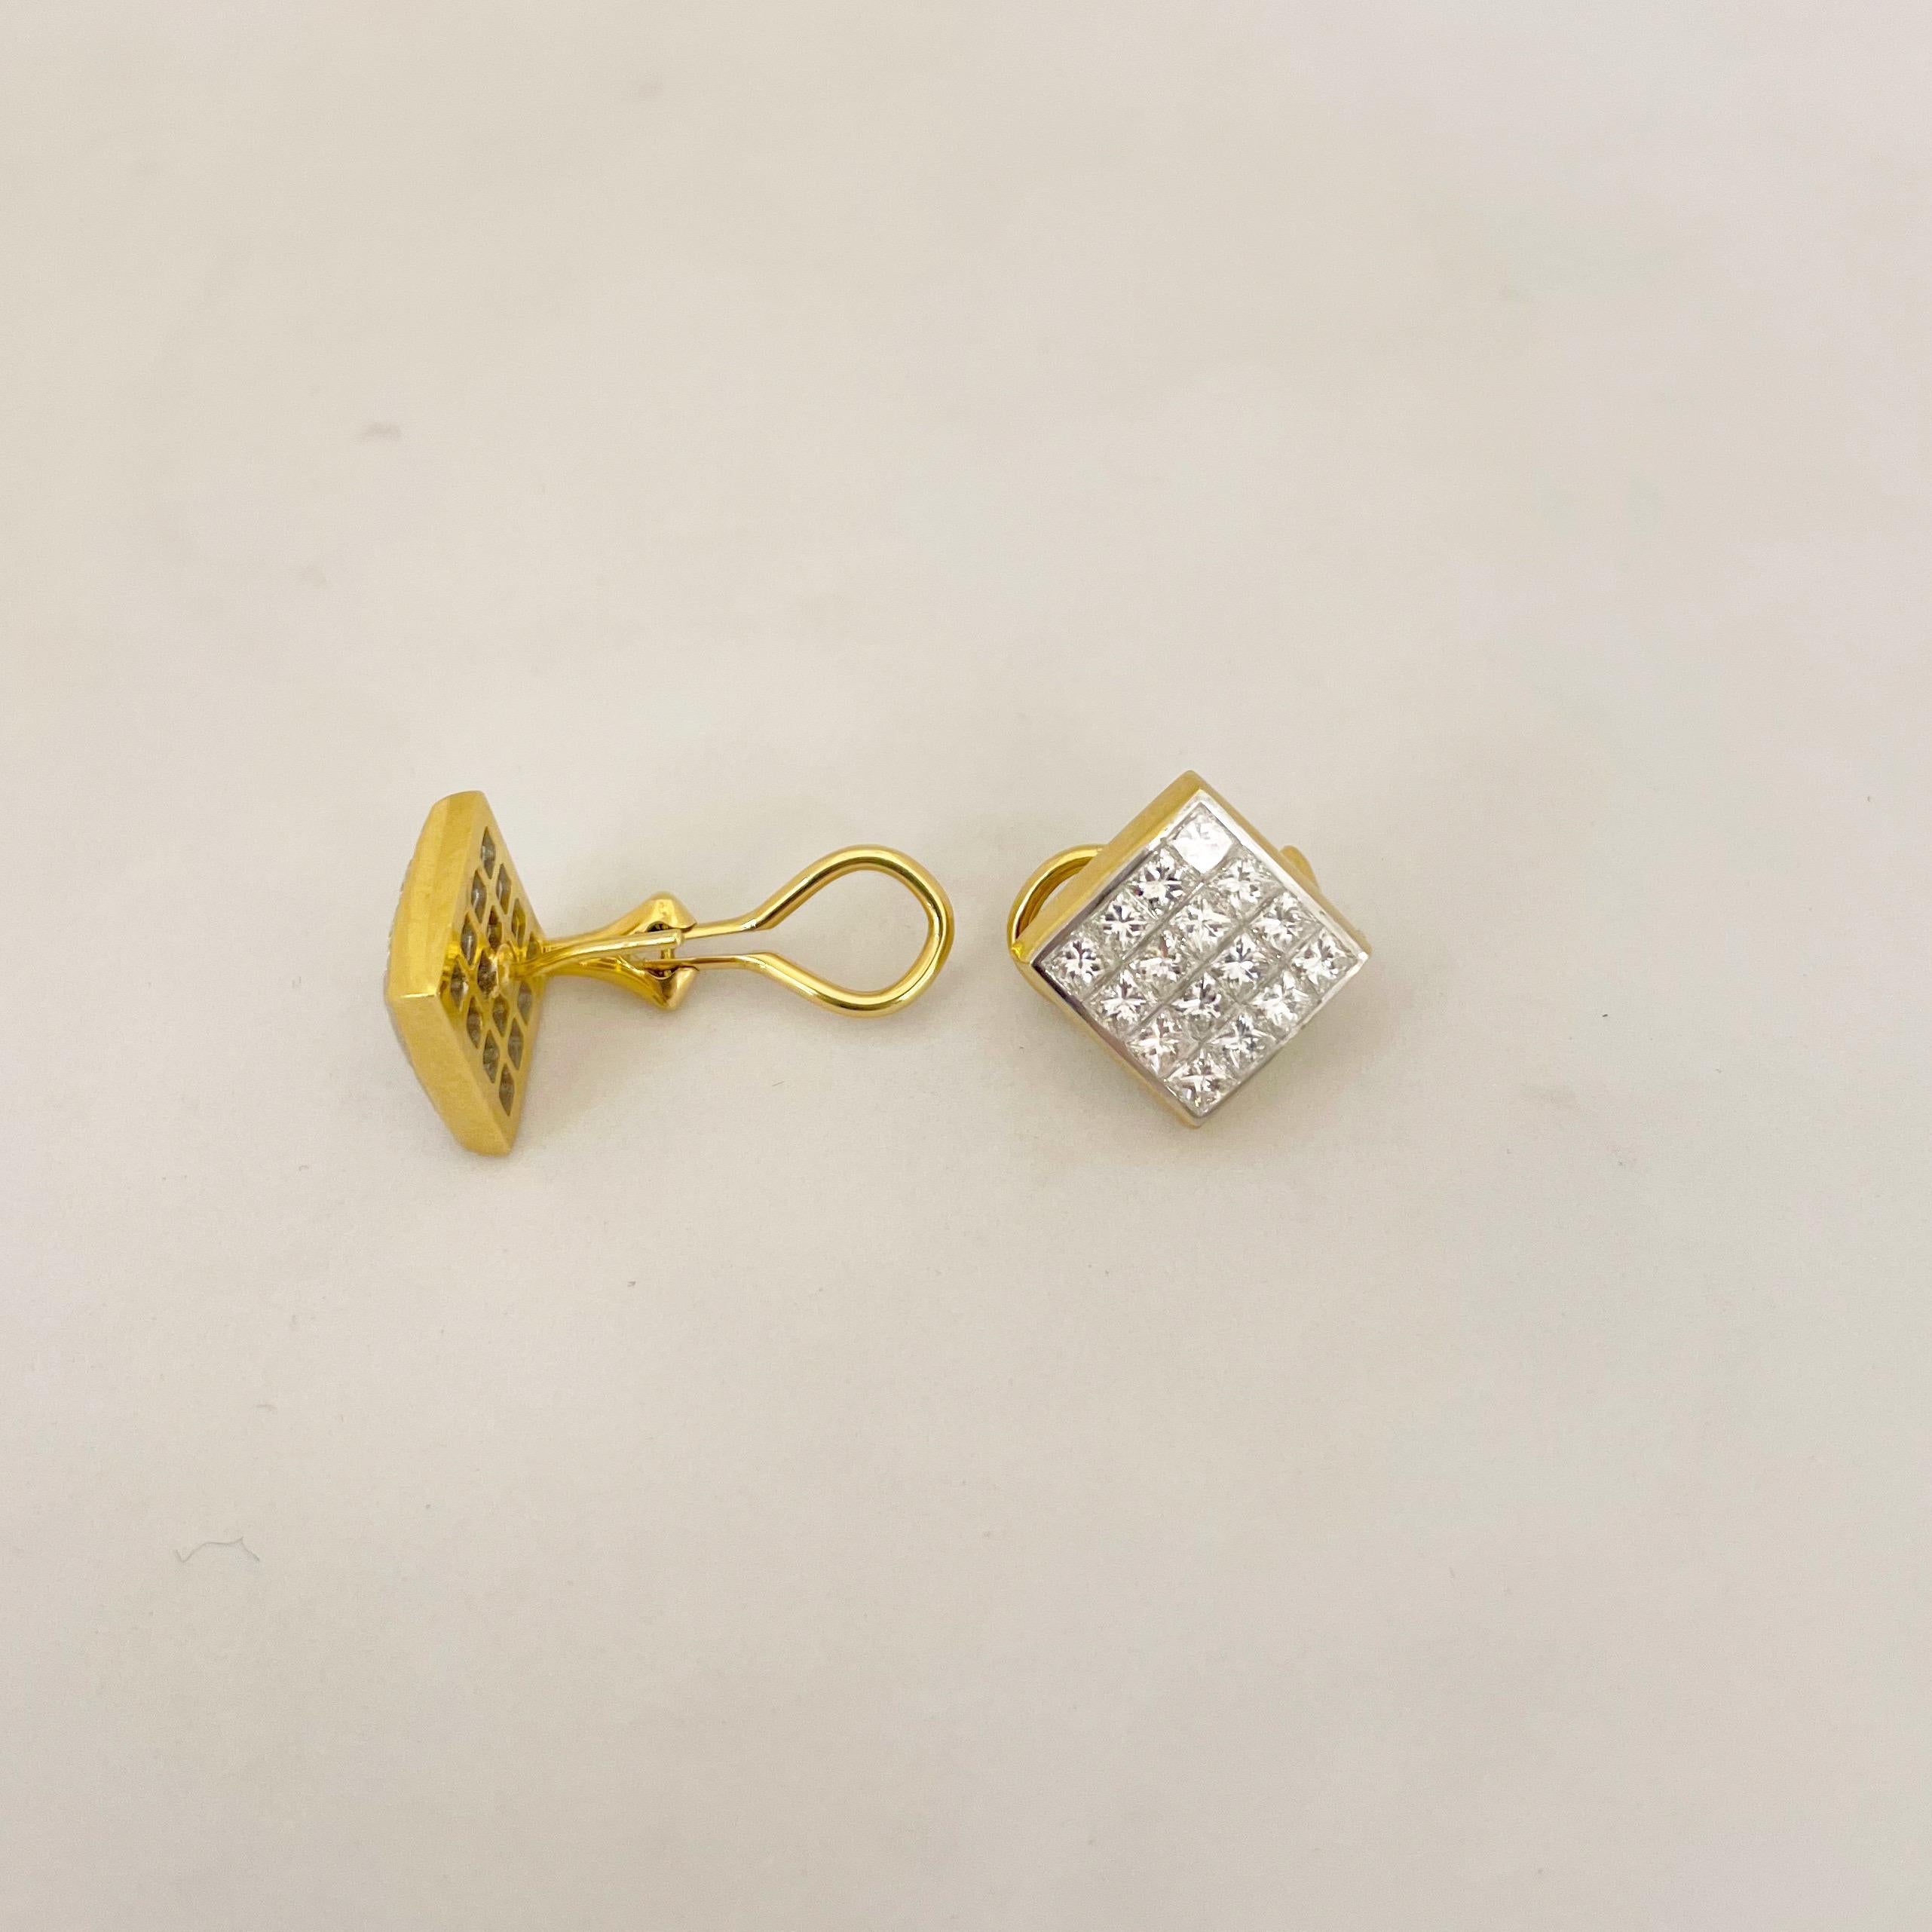 18KT Yellow and White Gold, 2.95Ct. Invisibly Set Princess Cut Diamond Earrings In New Condition For Sale In New York, NY